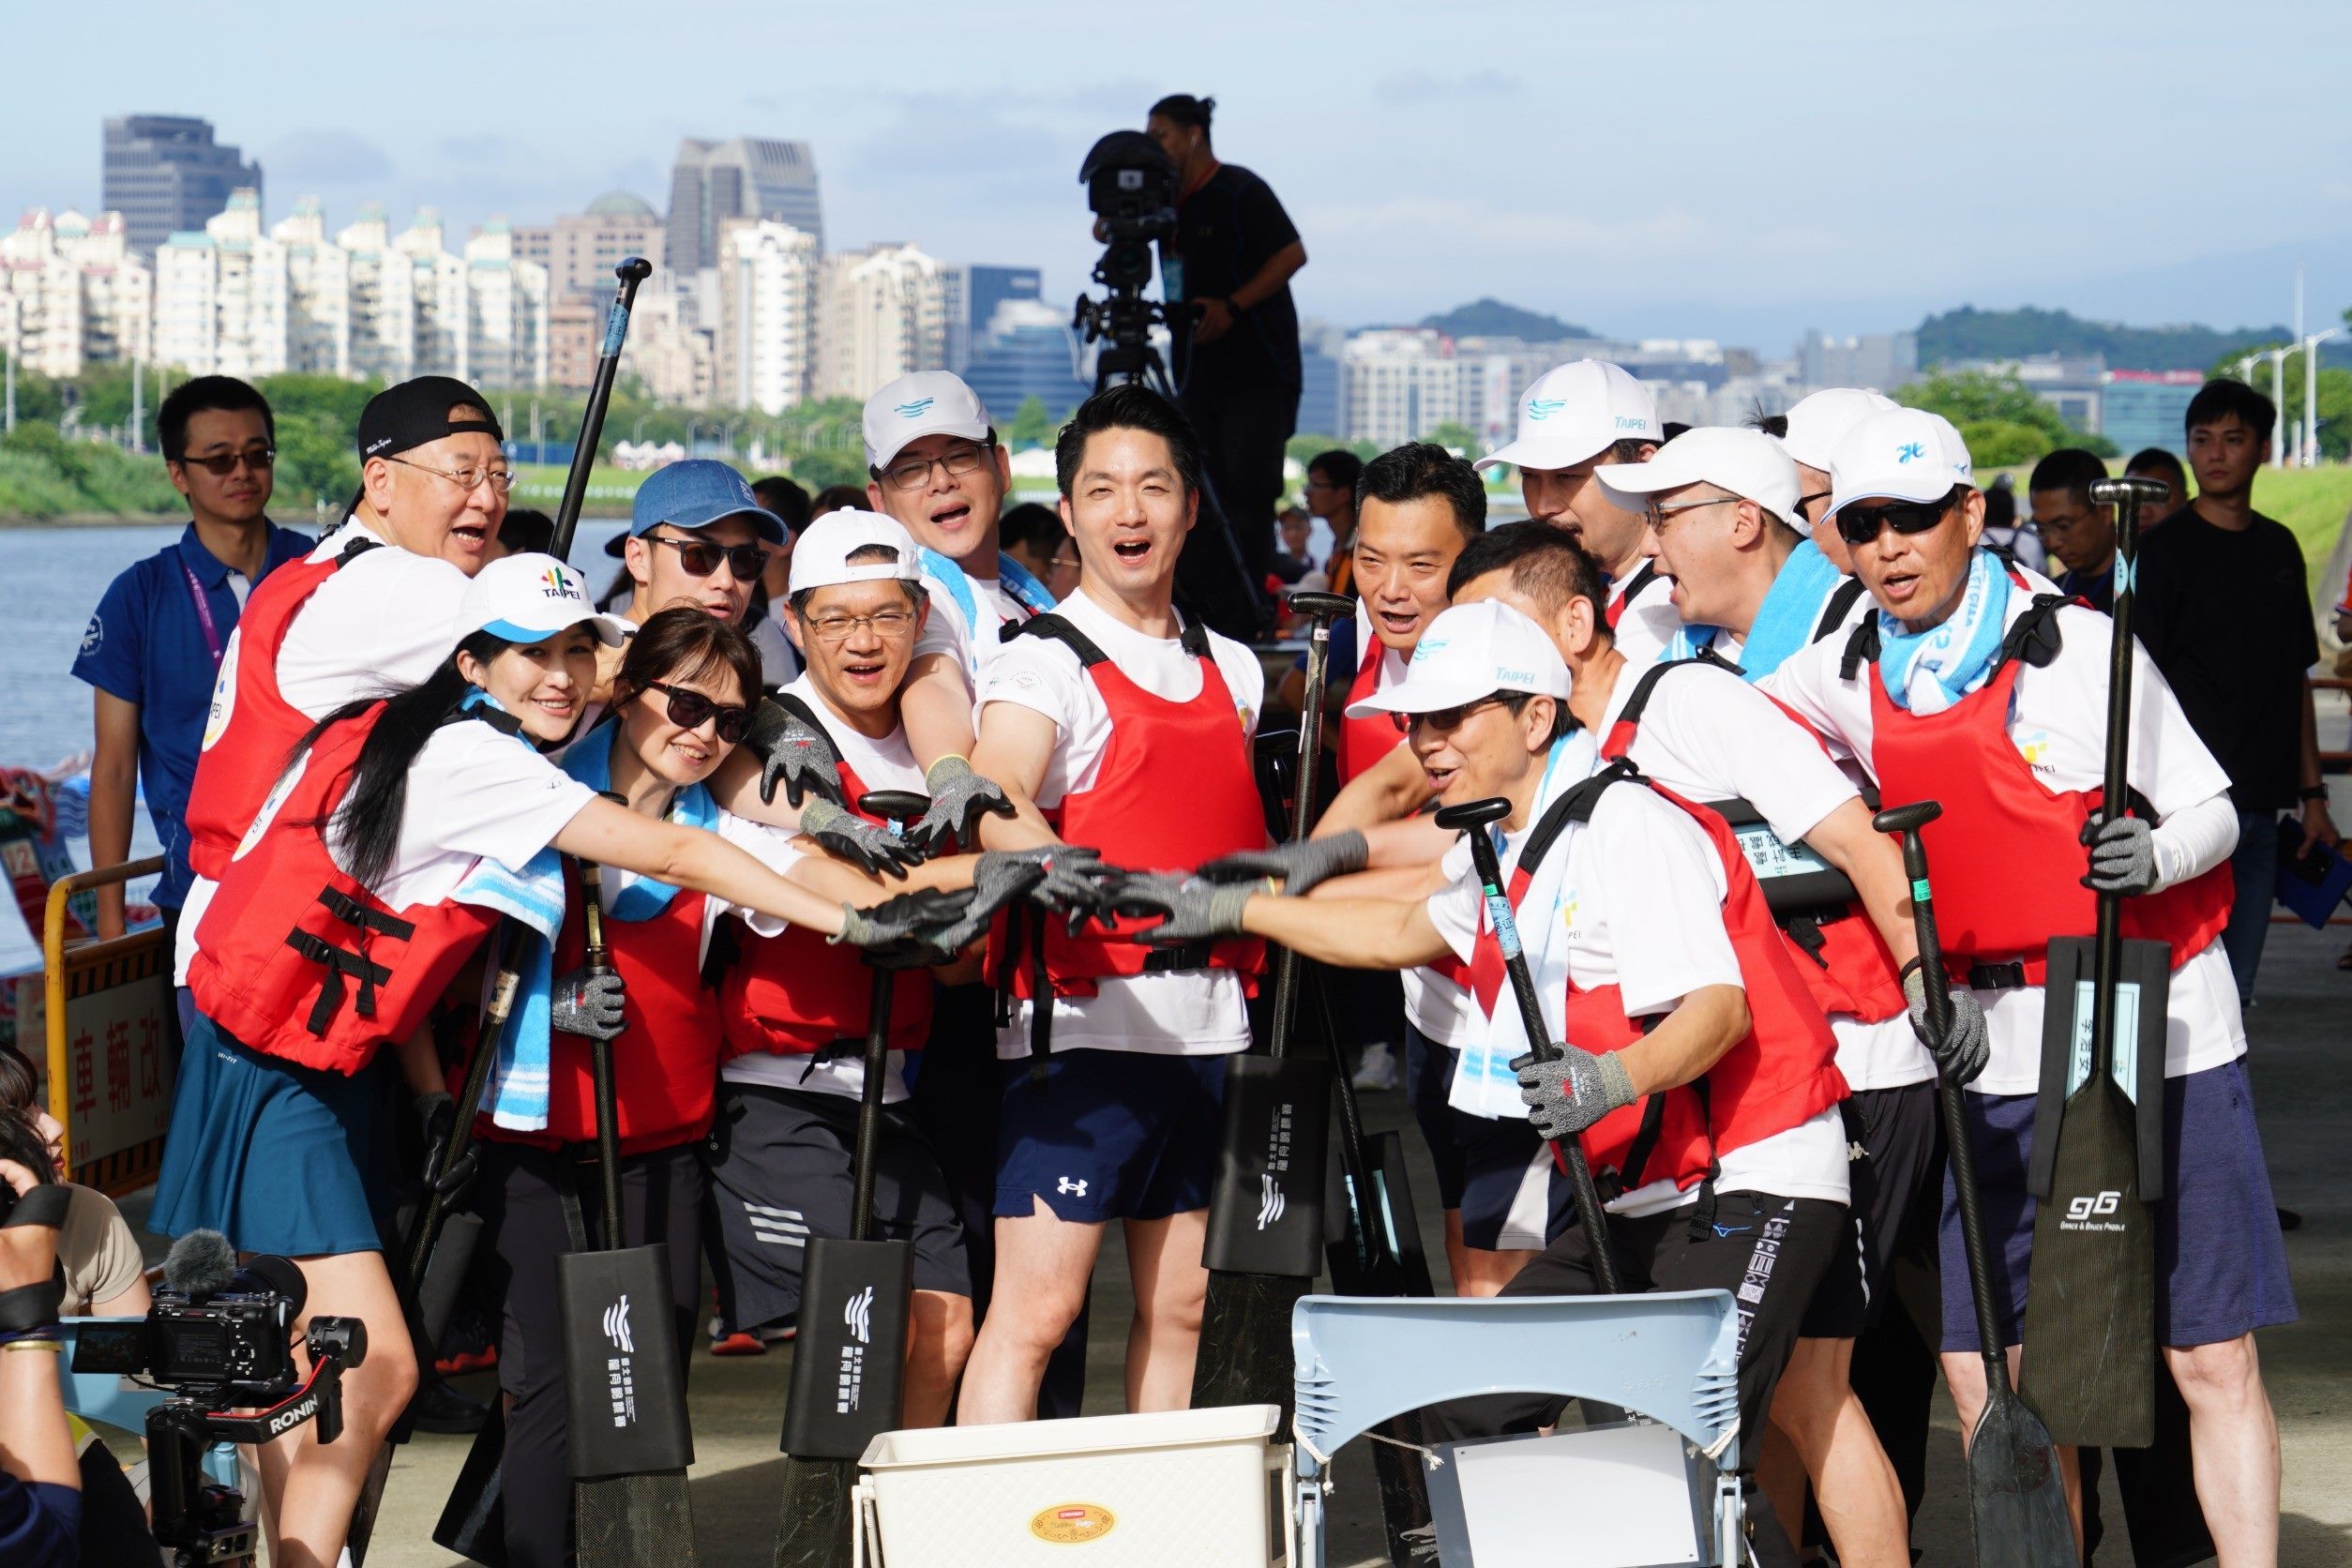 0608-Mayor Chiang Leads the Team of city officials in the Dragon Boat Championship